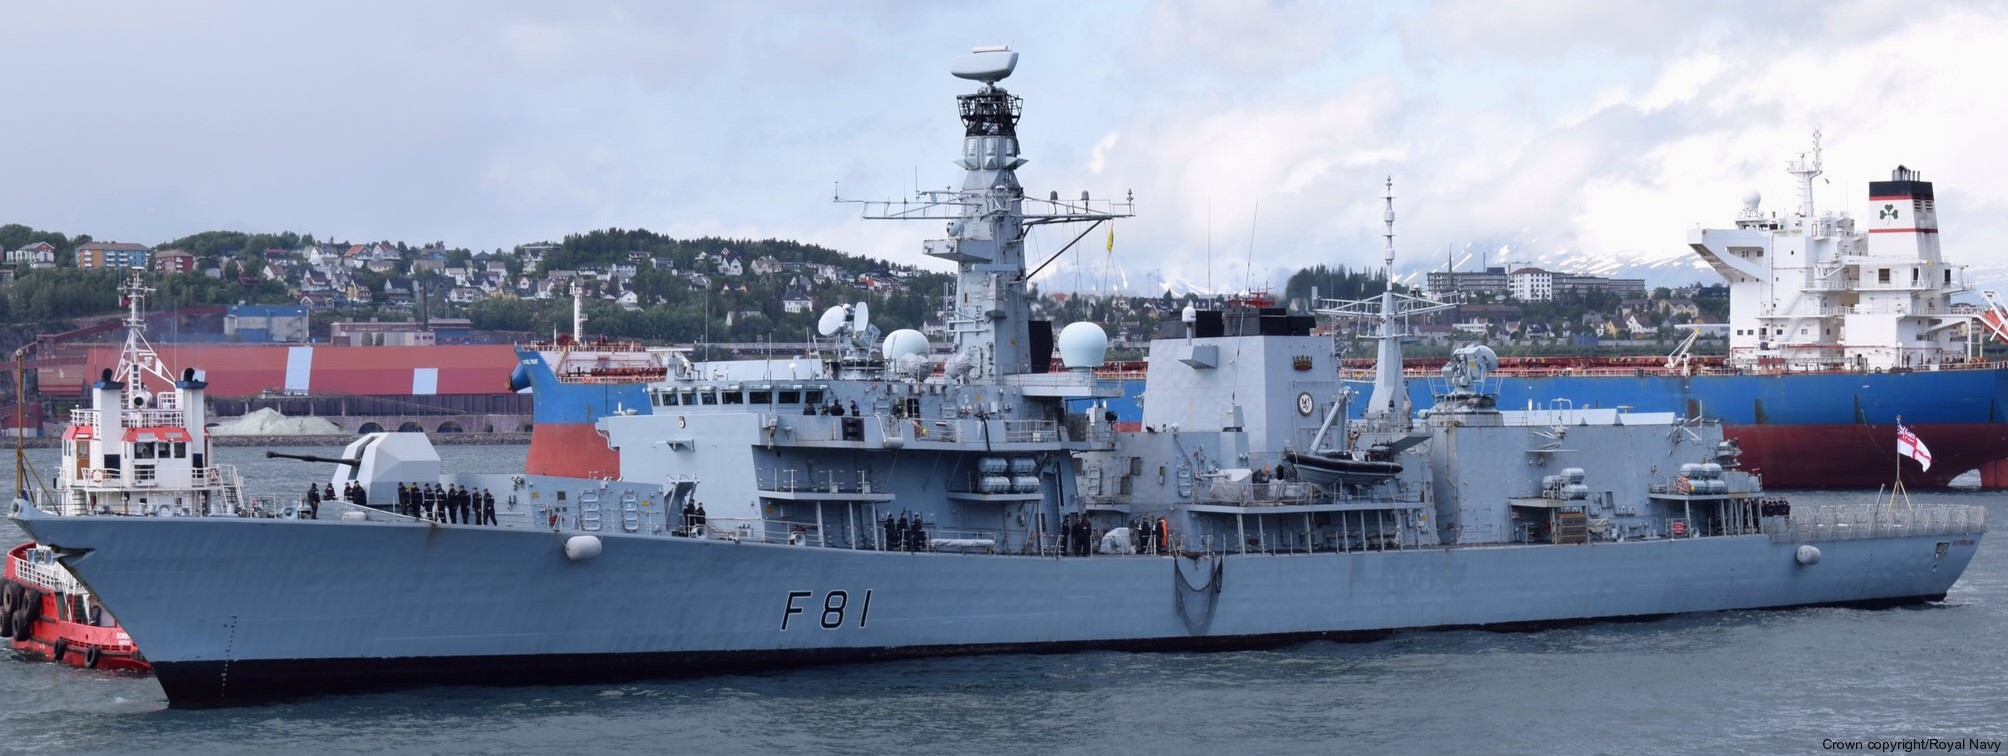 f-81 hms sutherland type 23 duke class guided missile frigate ffg royal navy 21